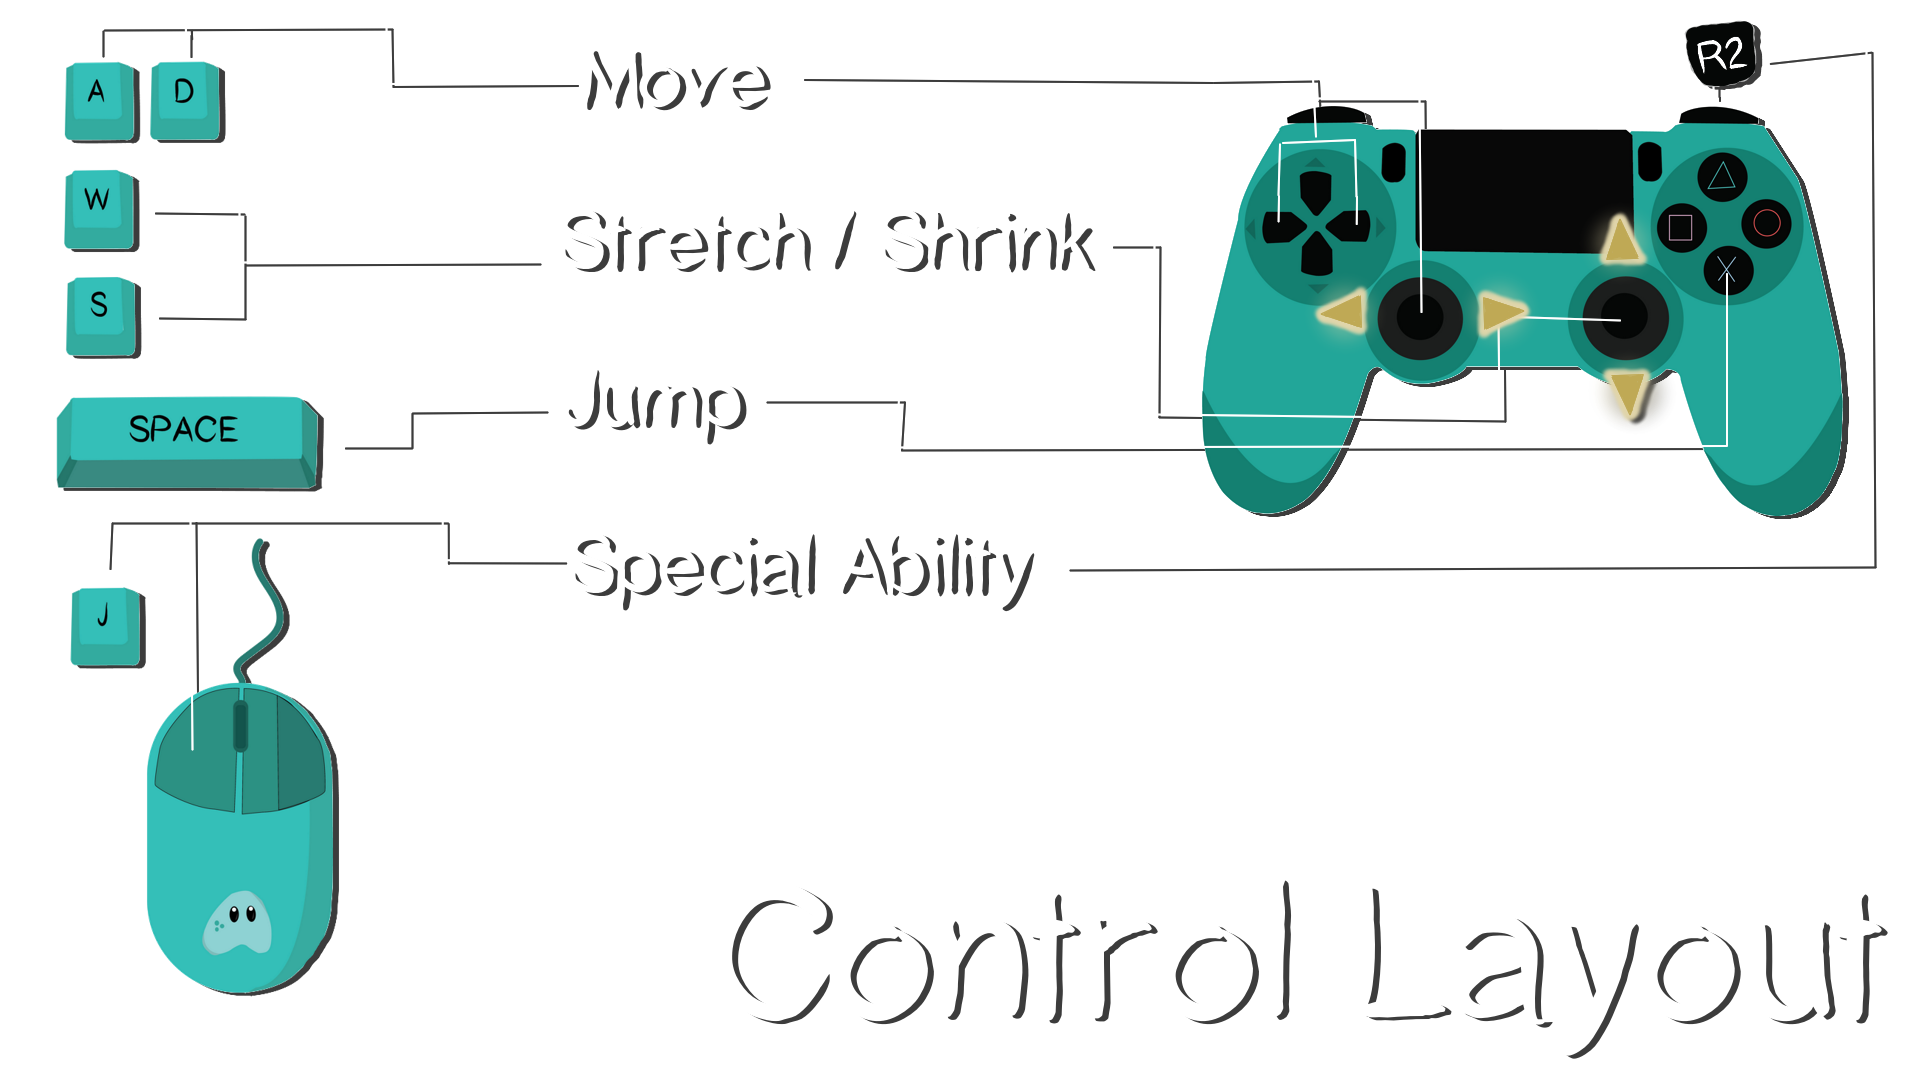 Control Layout